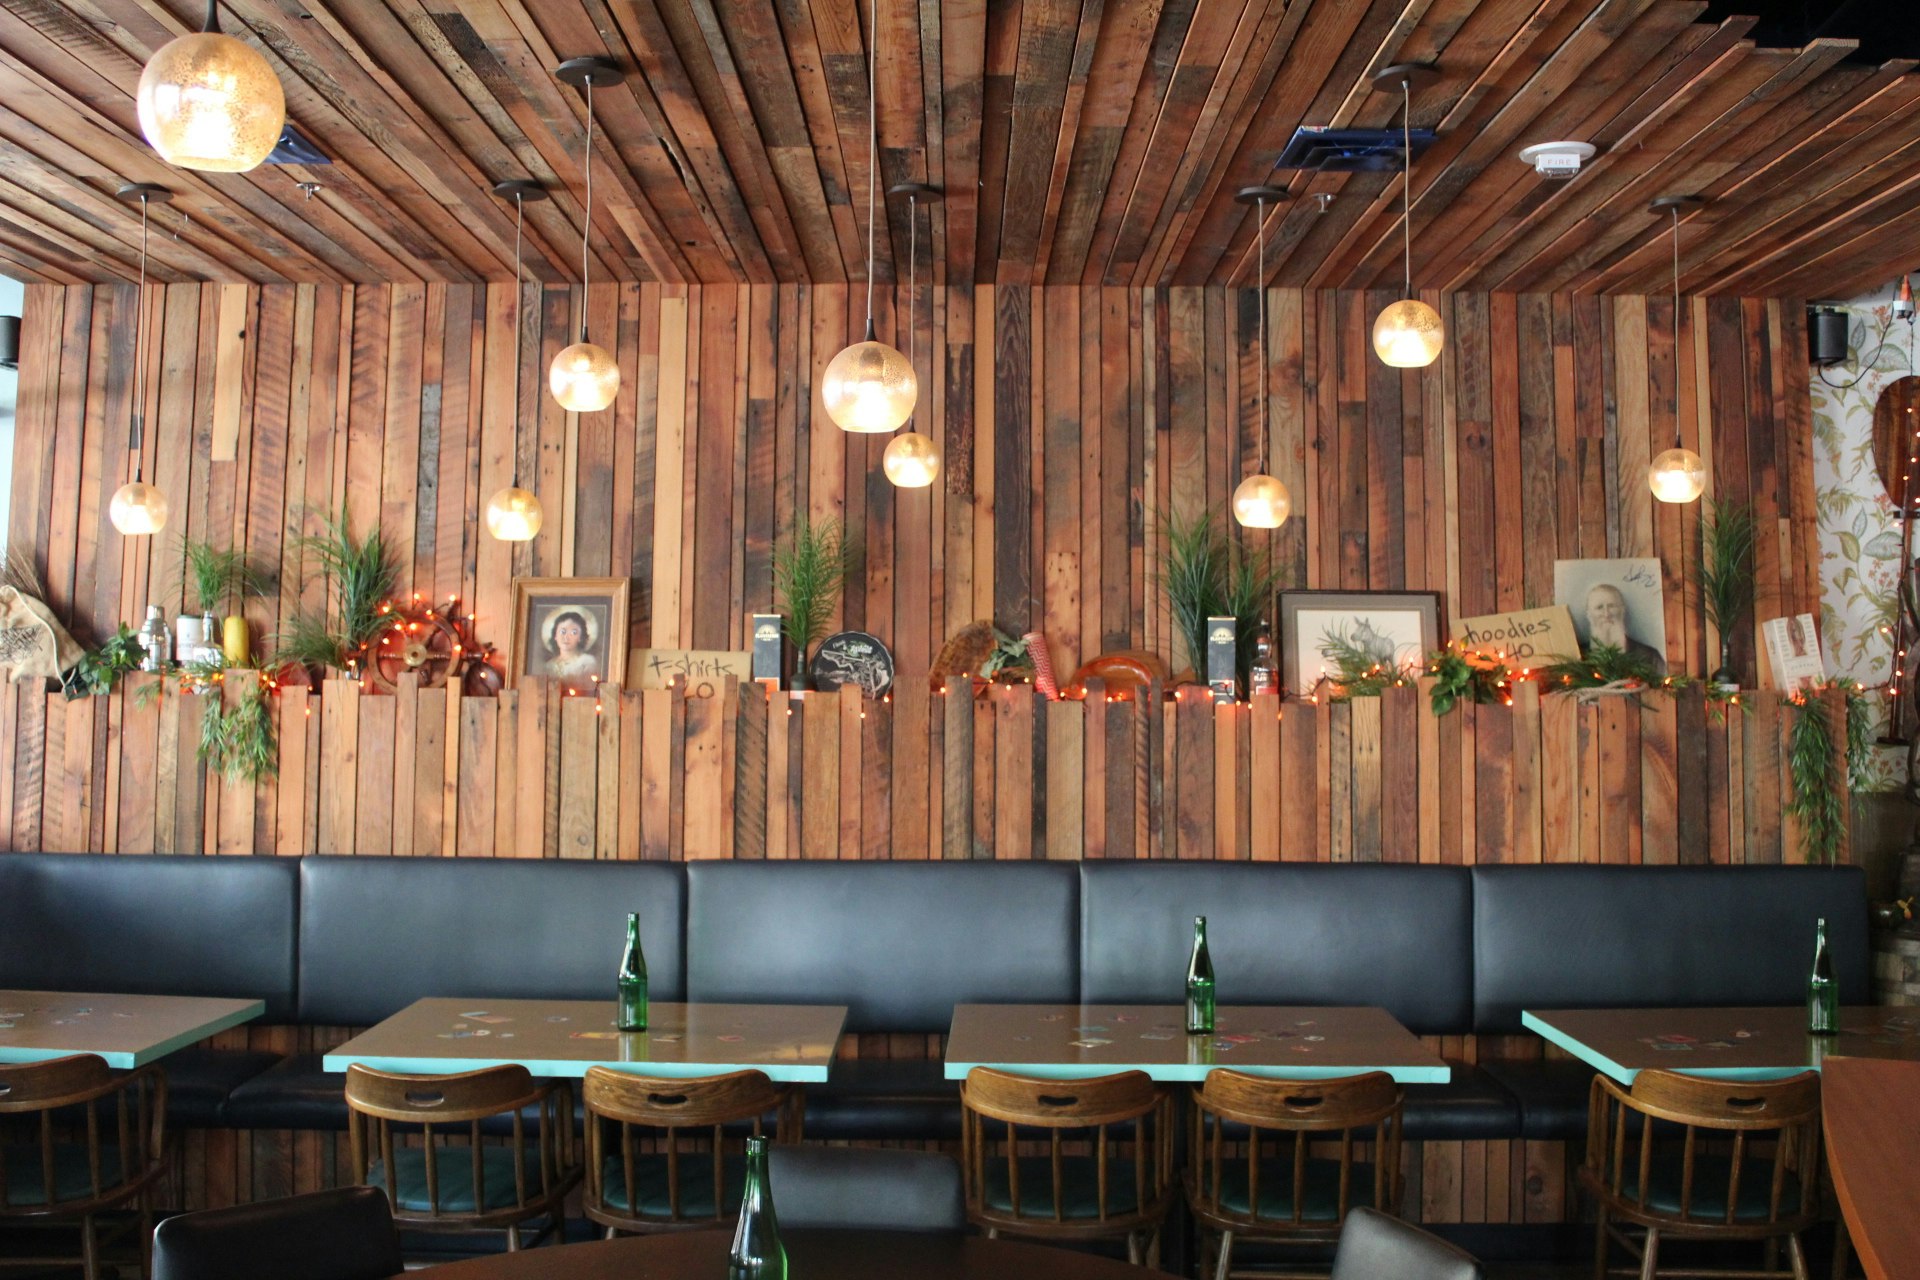 The interior of Navy Strength, a tiki bar in Seattle, is lined with worn wood panels from the top of the black banquet seating to the ceiling, which is also lined. White round lamps hang from the ceiling, and a shelf displays framed art, tchotkes, sea grass, and other ephemera   